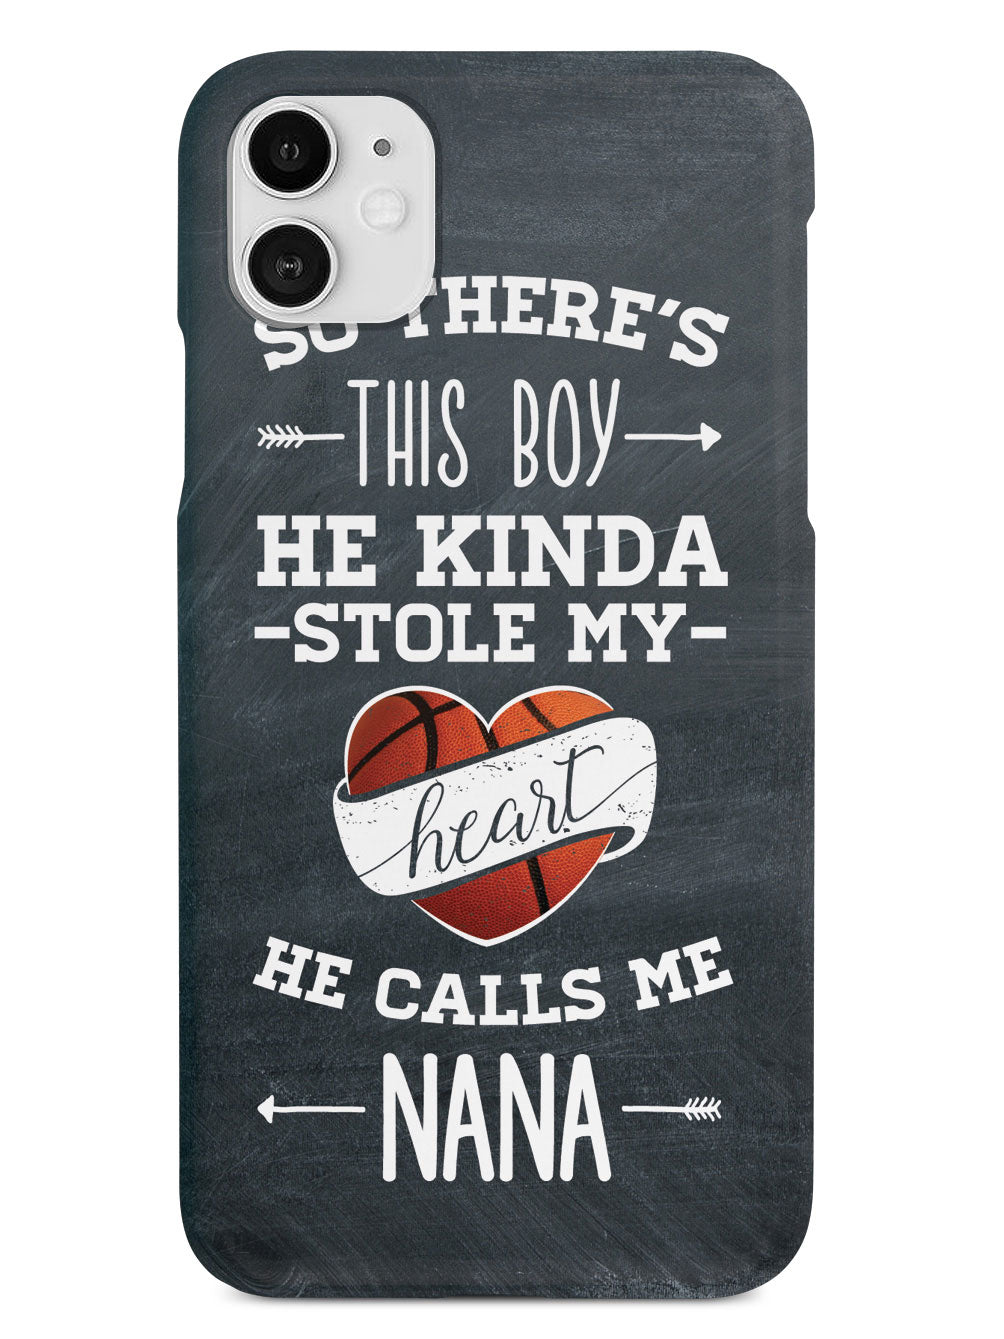 So there's this Boy - Basketball Player - Nana Case